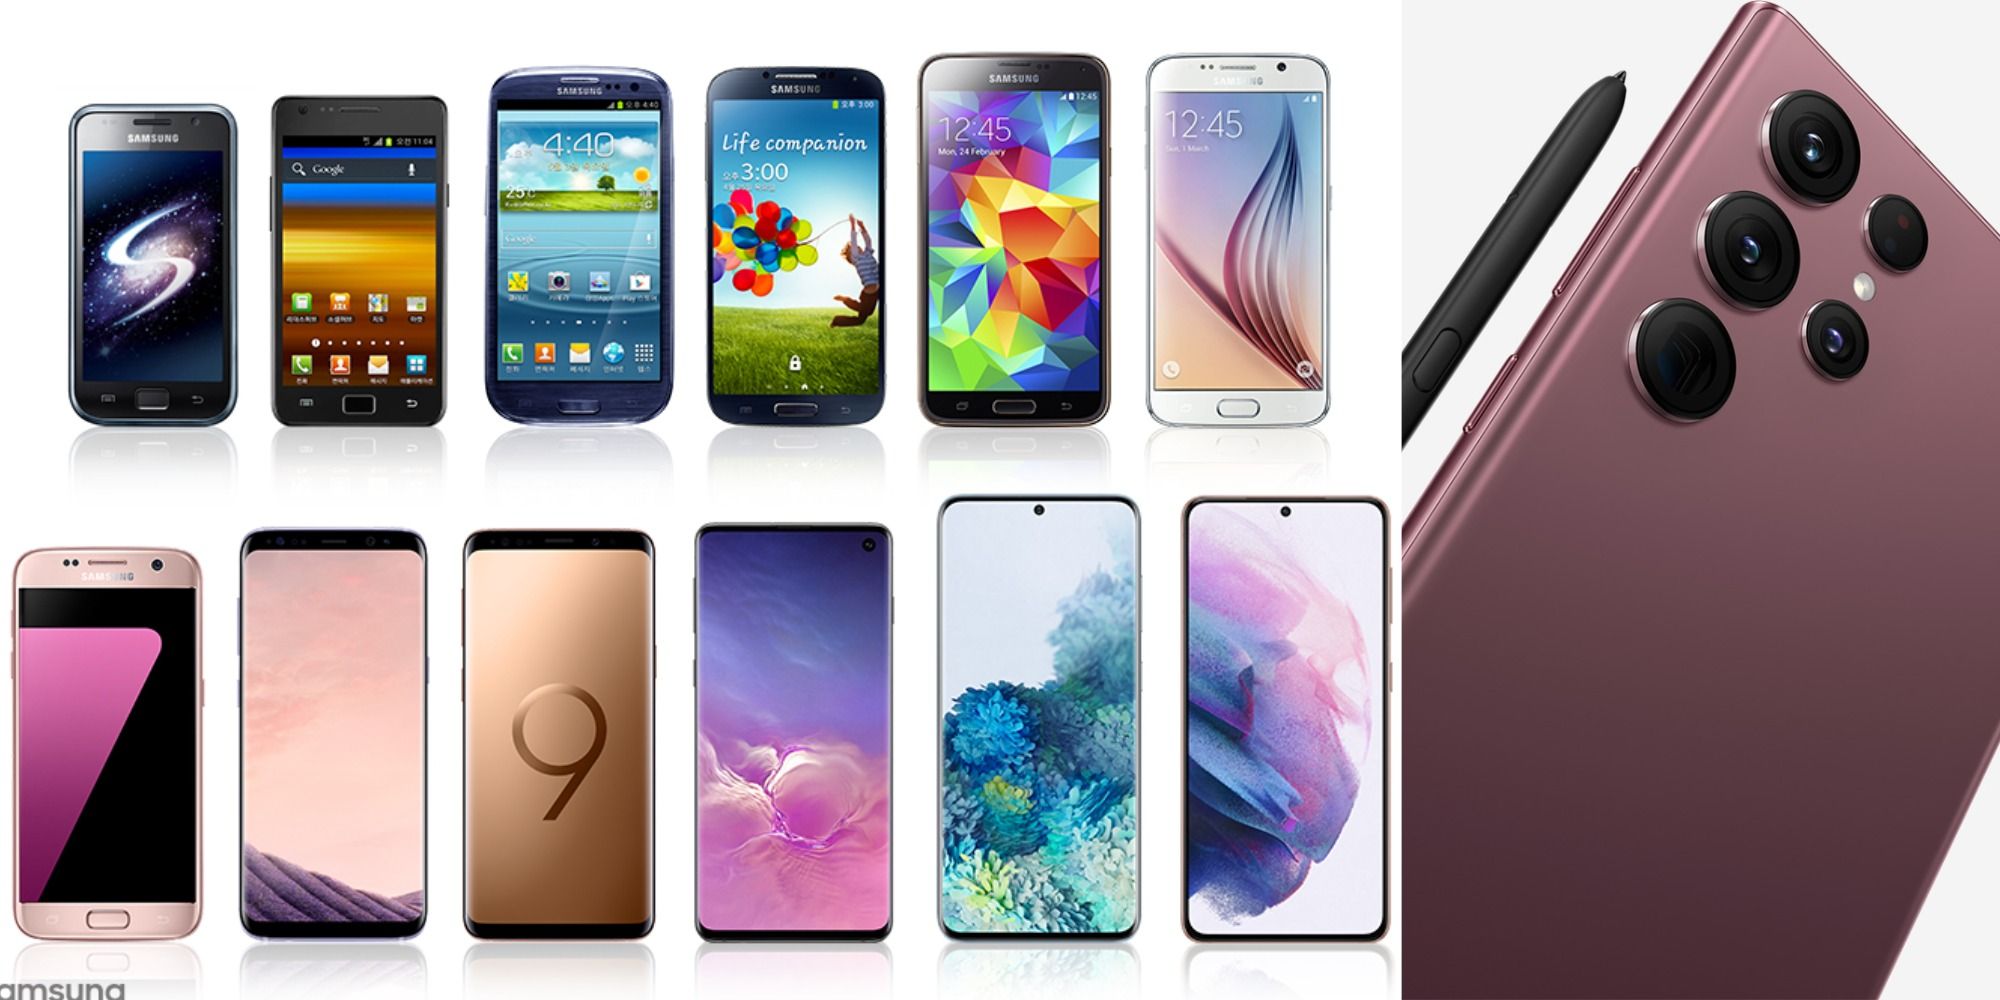 Uk Used Phones: Price-List Of All Samsung Phones LowkeyTech, 49% OFF